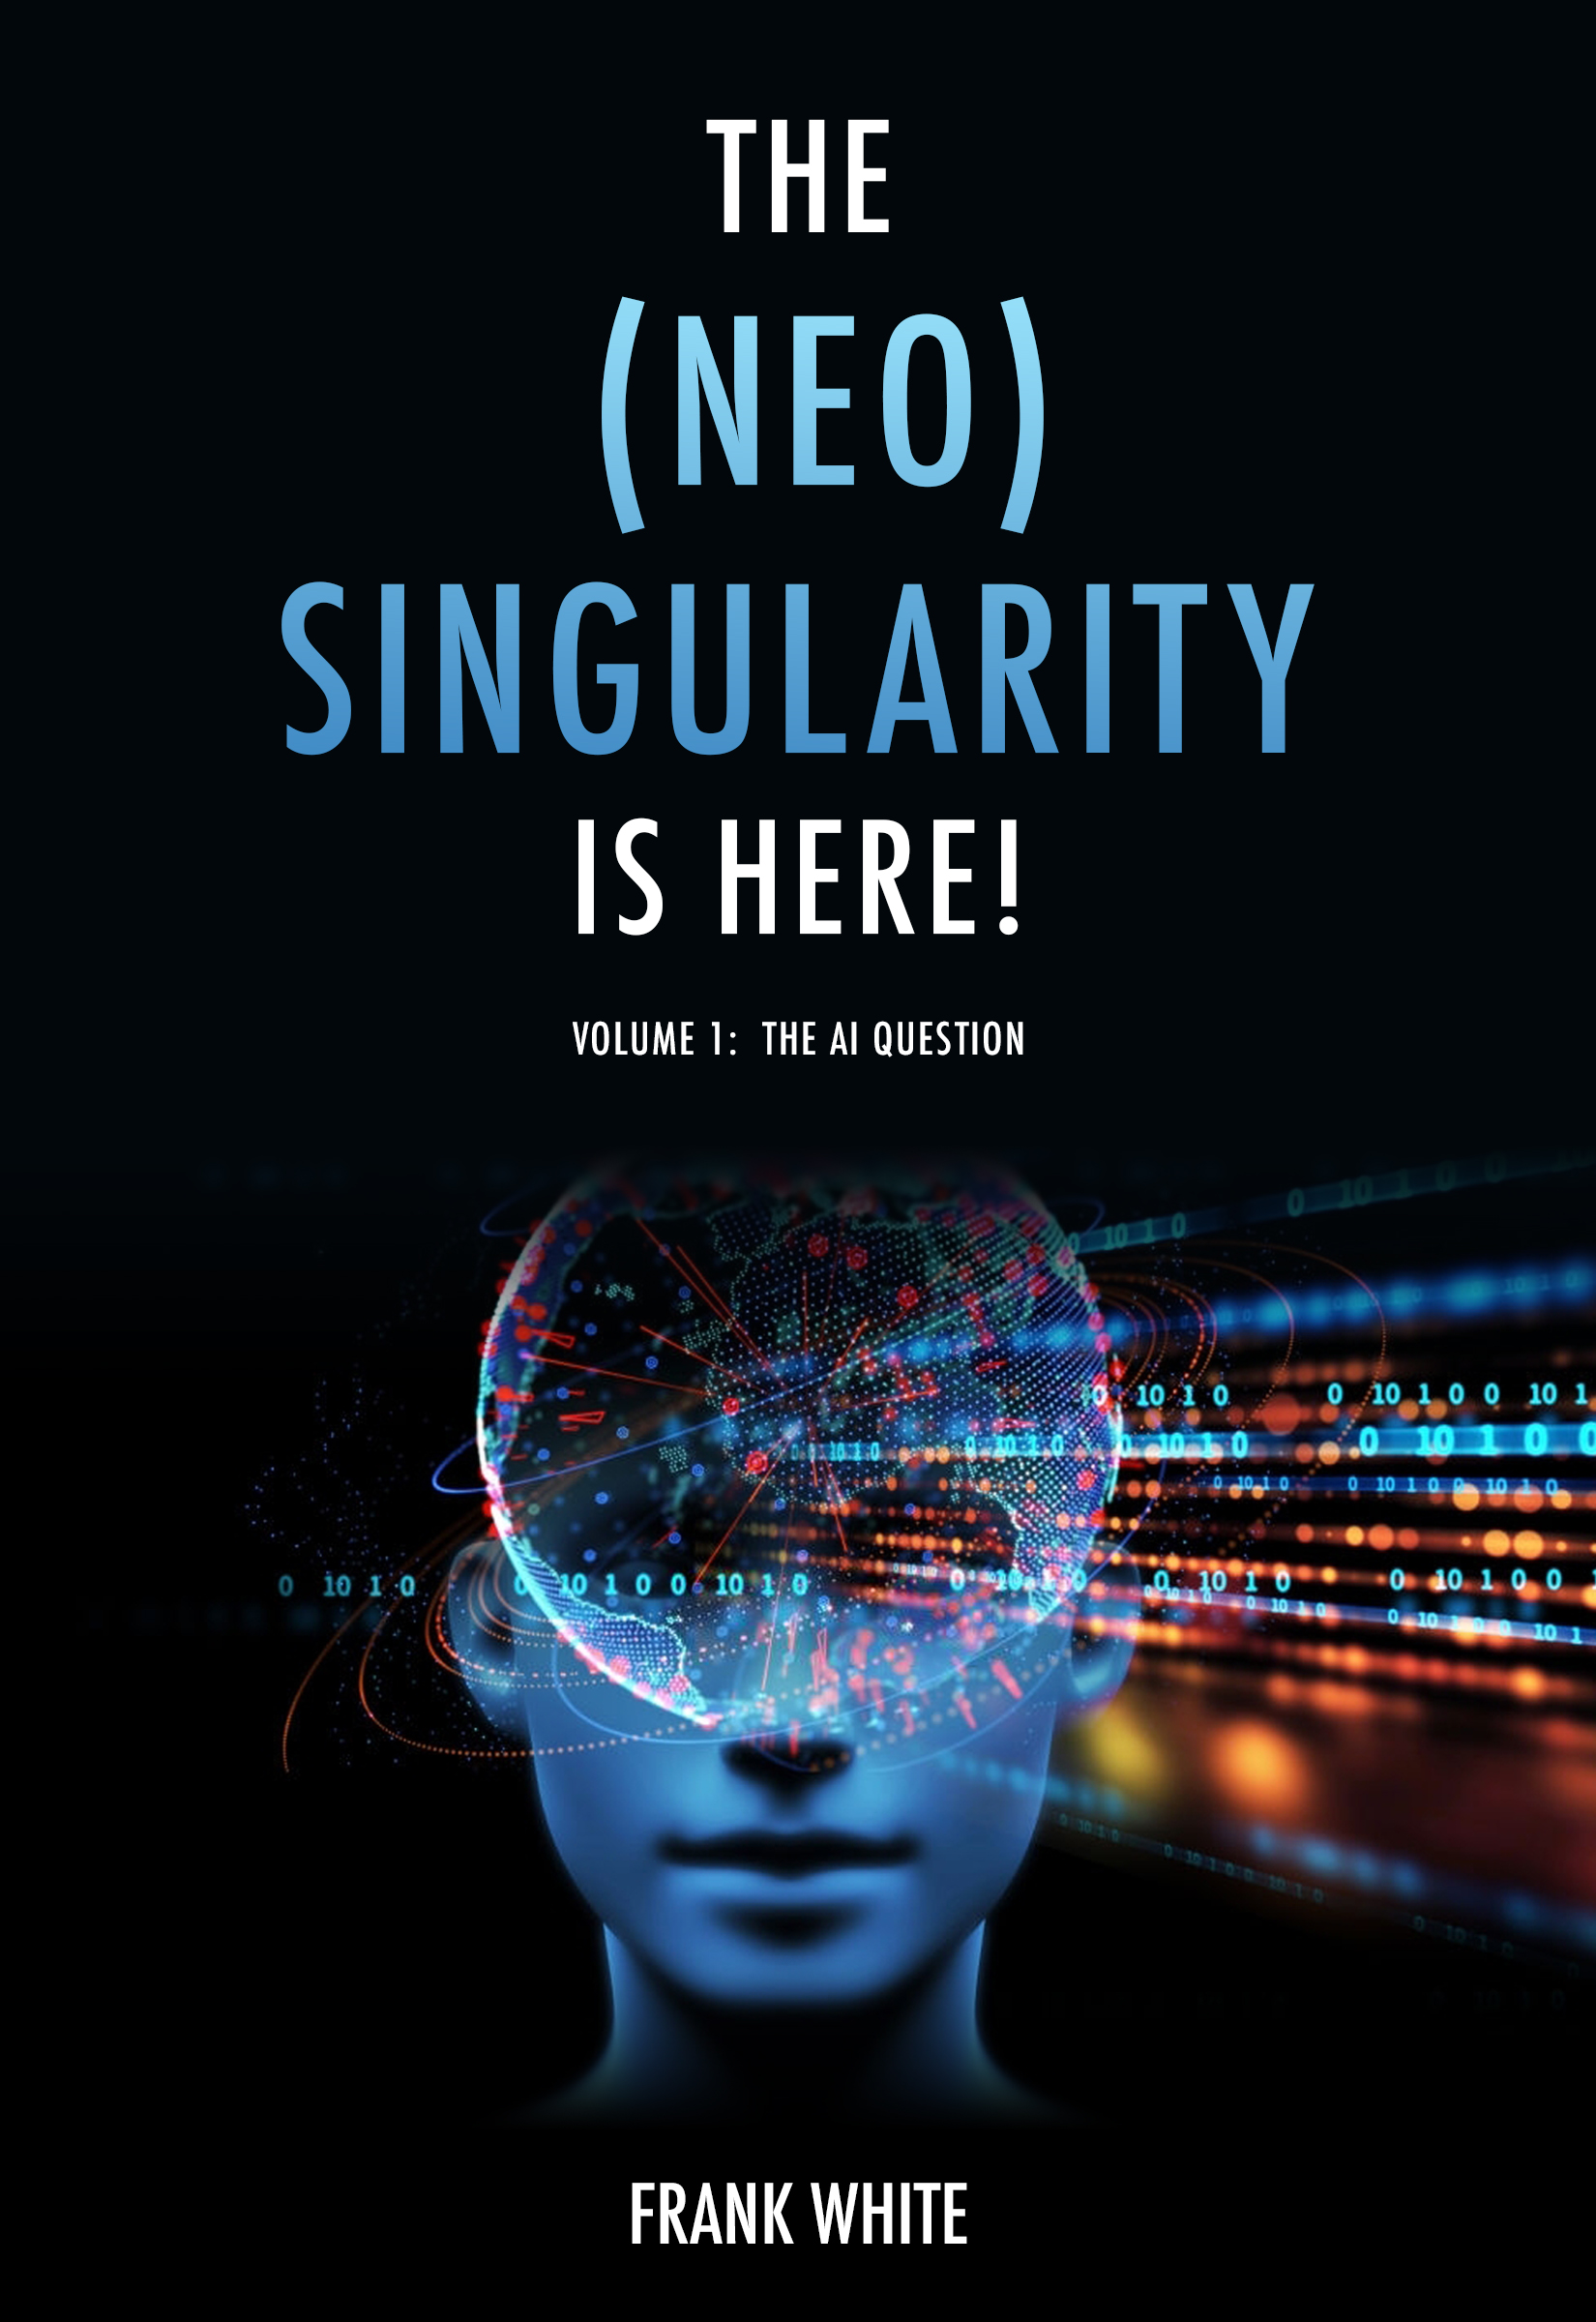 The Neo Singularity book cover